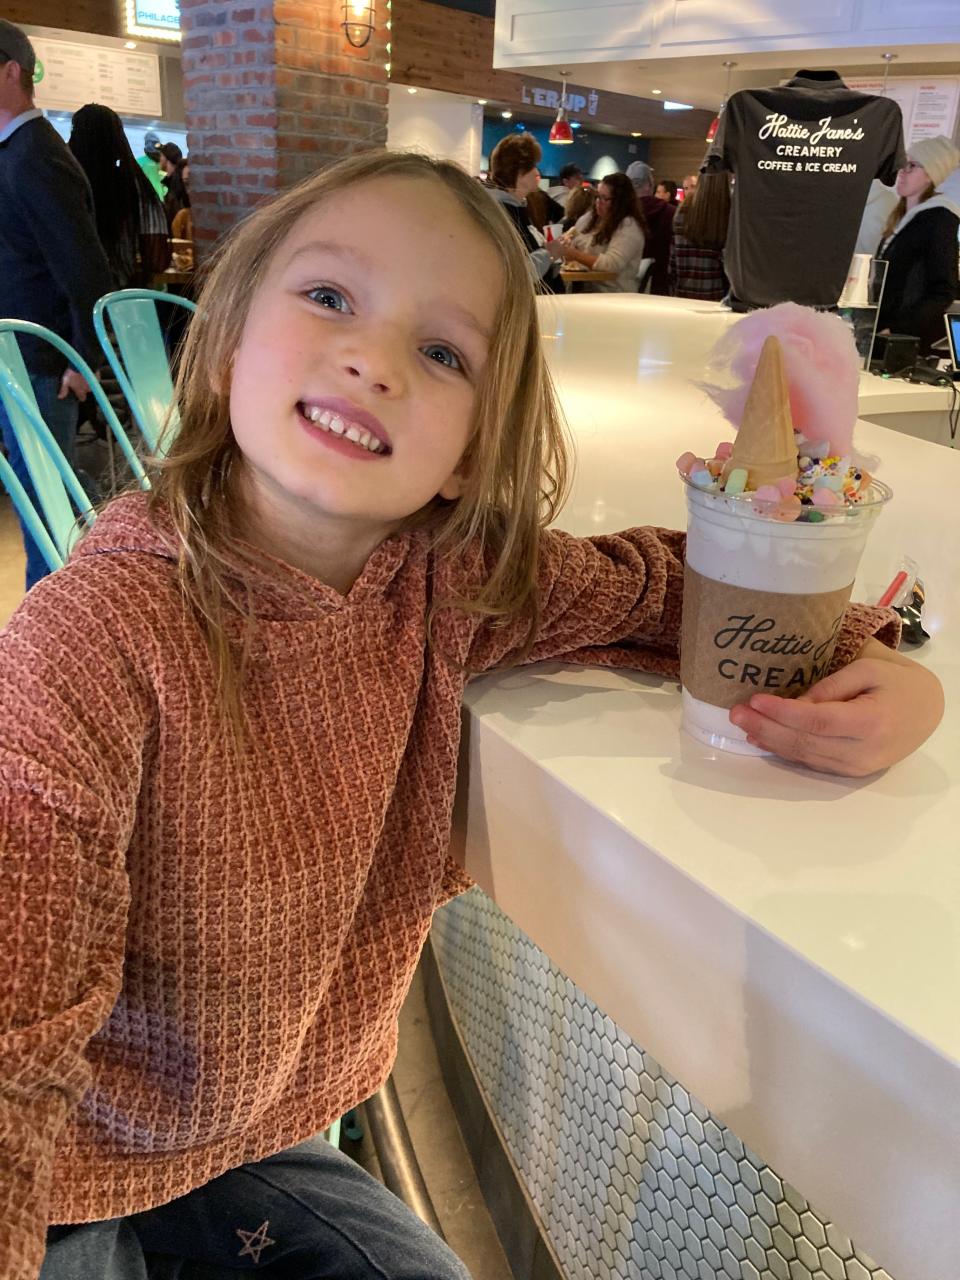 The Unicorn milkshake at Hattie Jane's Creamery, located in Assembly Food Hall in downtown Nashville, features cotton candy fluff and colored marshmallows.